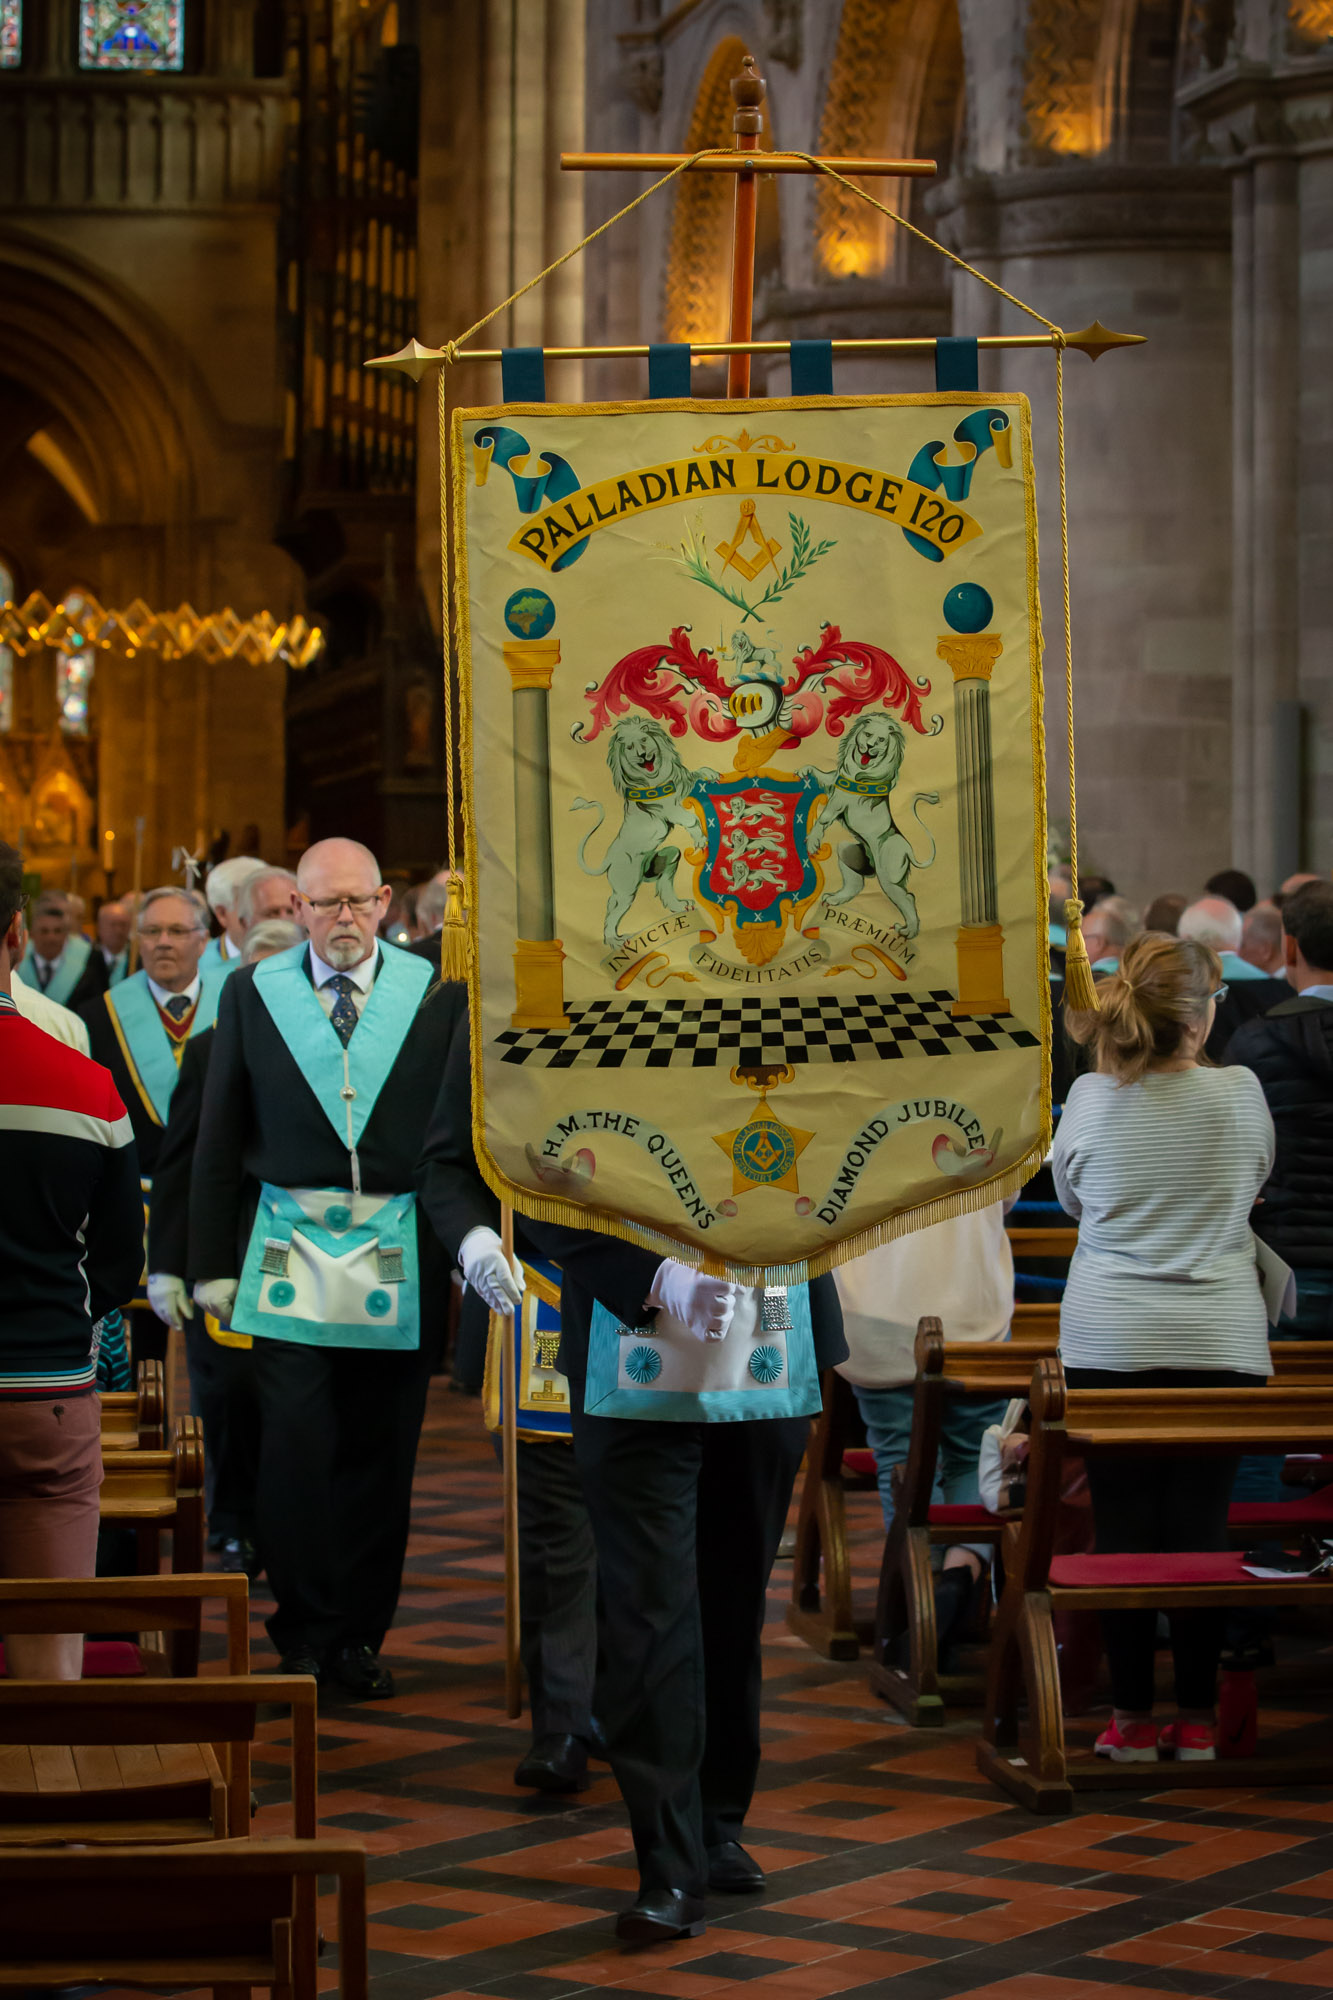 Photo of Palladian Lodge Standard Bearer leading the procession into the Cathedral